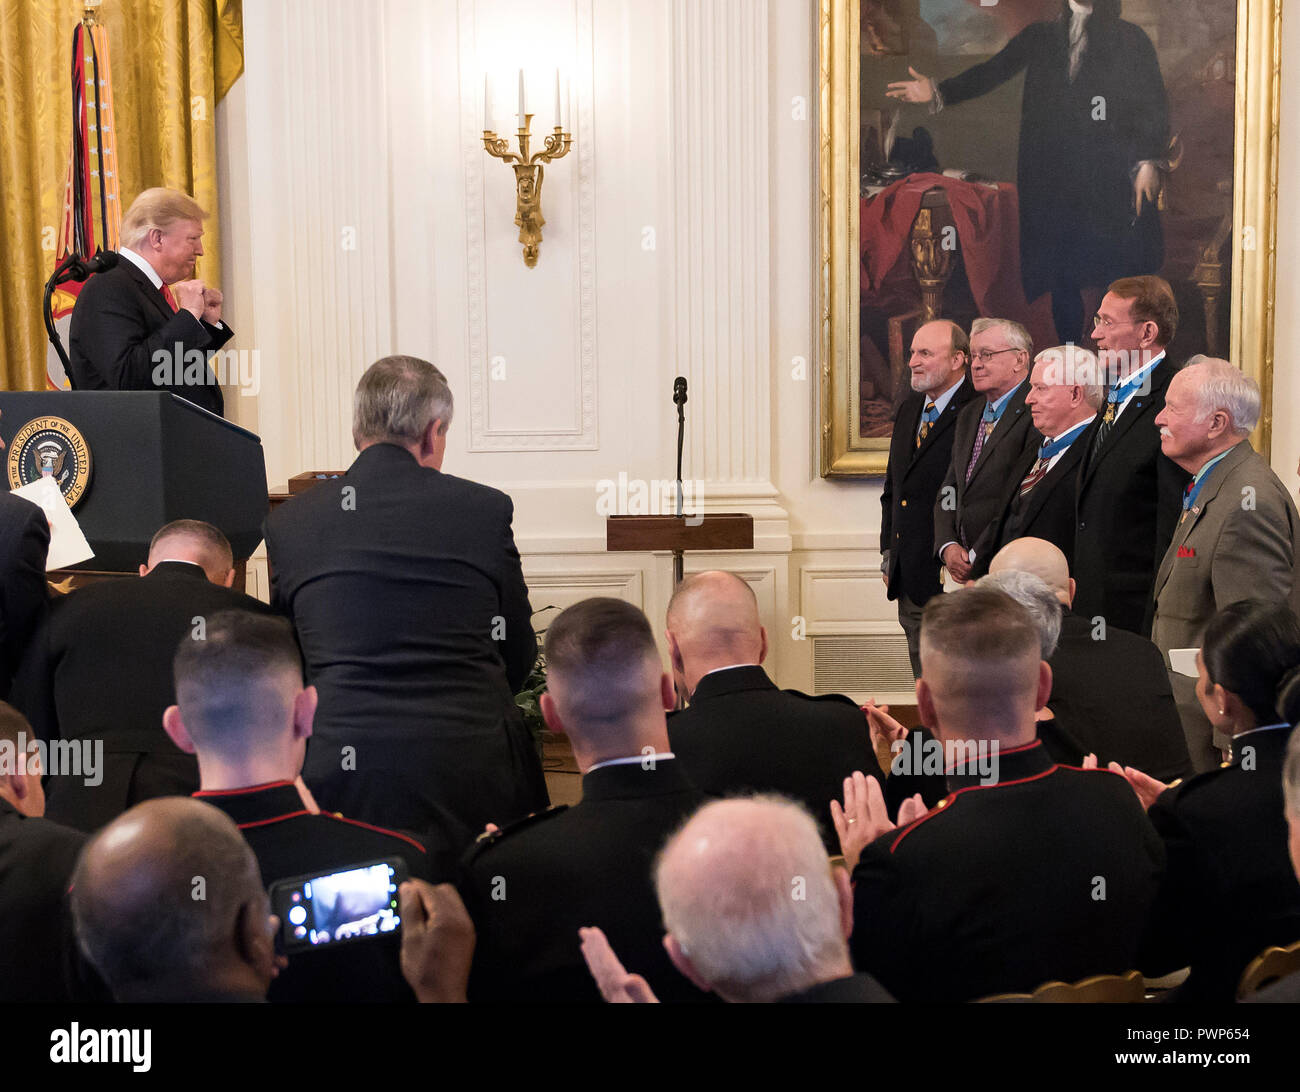 United States President Donald J. Trump acknowledges previous recipients during the ceremony where he will award the Medal of Honor to Sergeant Major John L. Canley, United States Marine Corps (Retired), for conspicuous gallantry during the Vietnam War in a ceremony in the East Room of the the White House in Washington, DC on Wednesday, October 17, 2018. Credit: Ron Sachs/CNP | usage worldwide Stock Photo